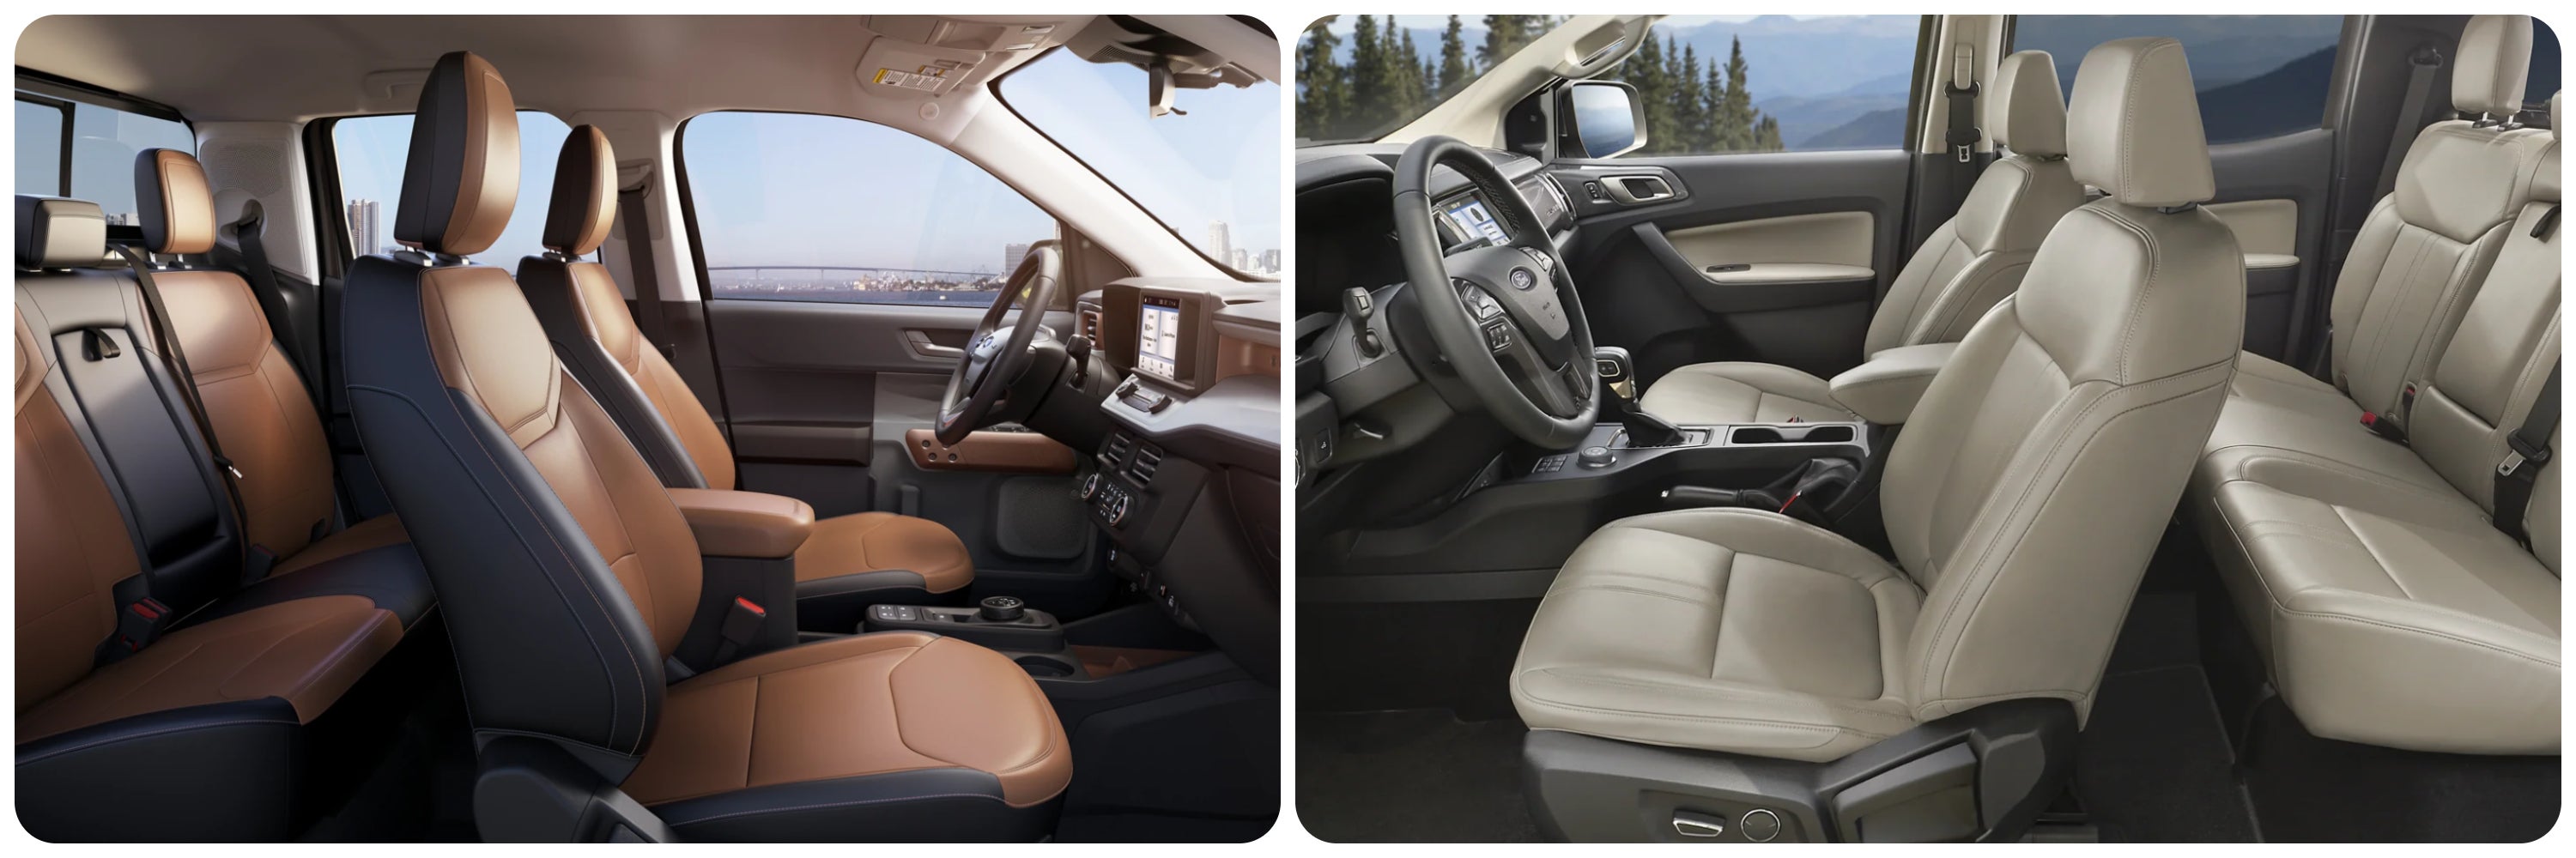 A view of the interior cabin and seating of the 2023 Ford Maverick on the left, the 2023 Ford Ranger SuperCrew on the right.